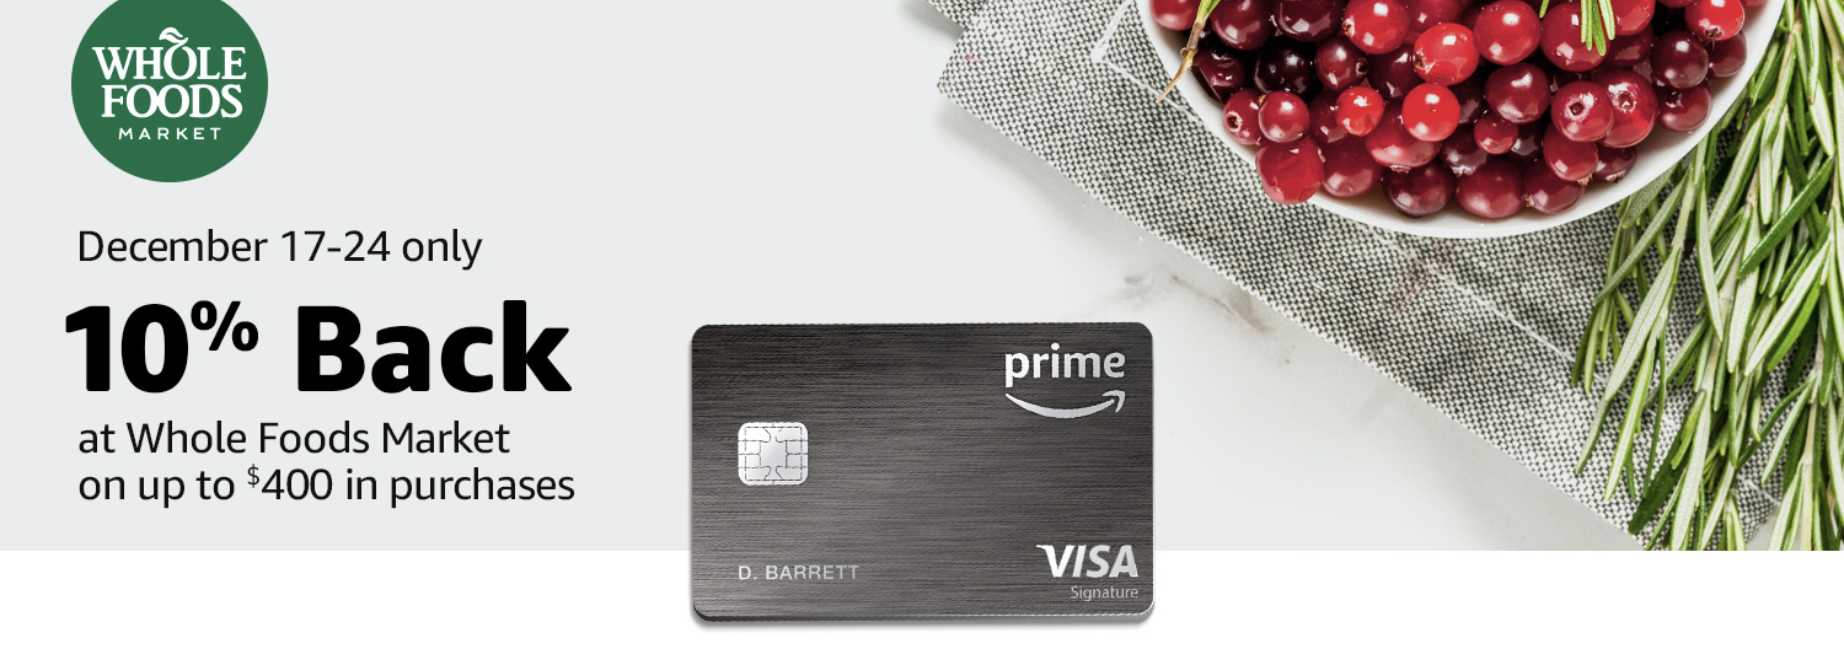 Amazon Cardholders Can Earn Double Rewards at Whole Foods